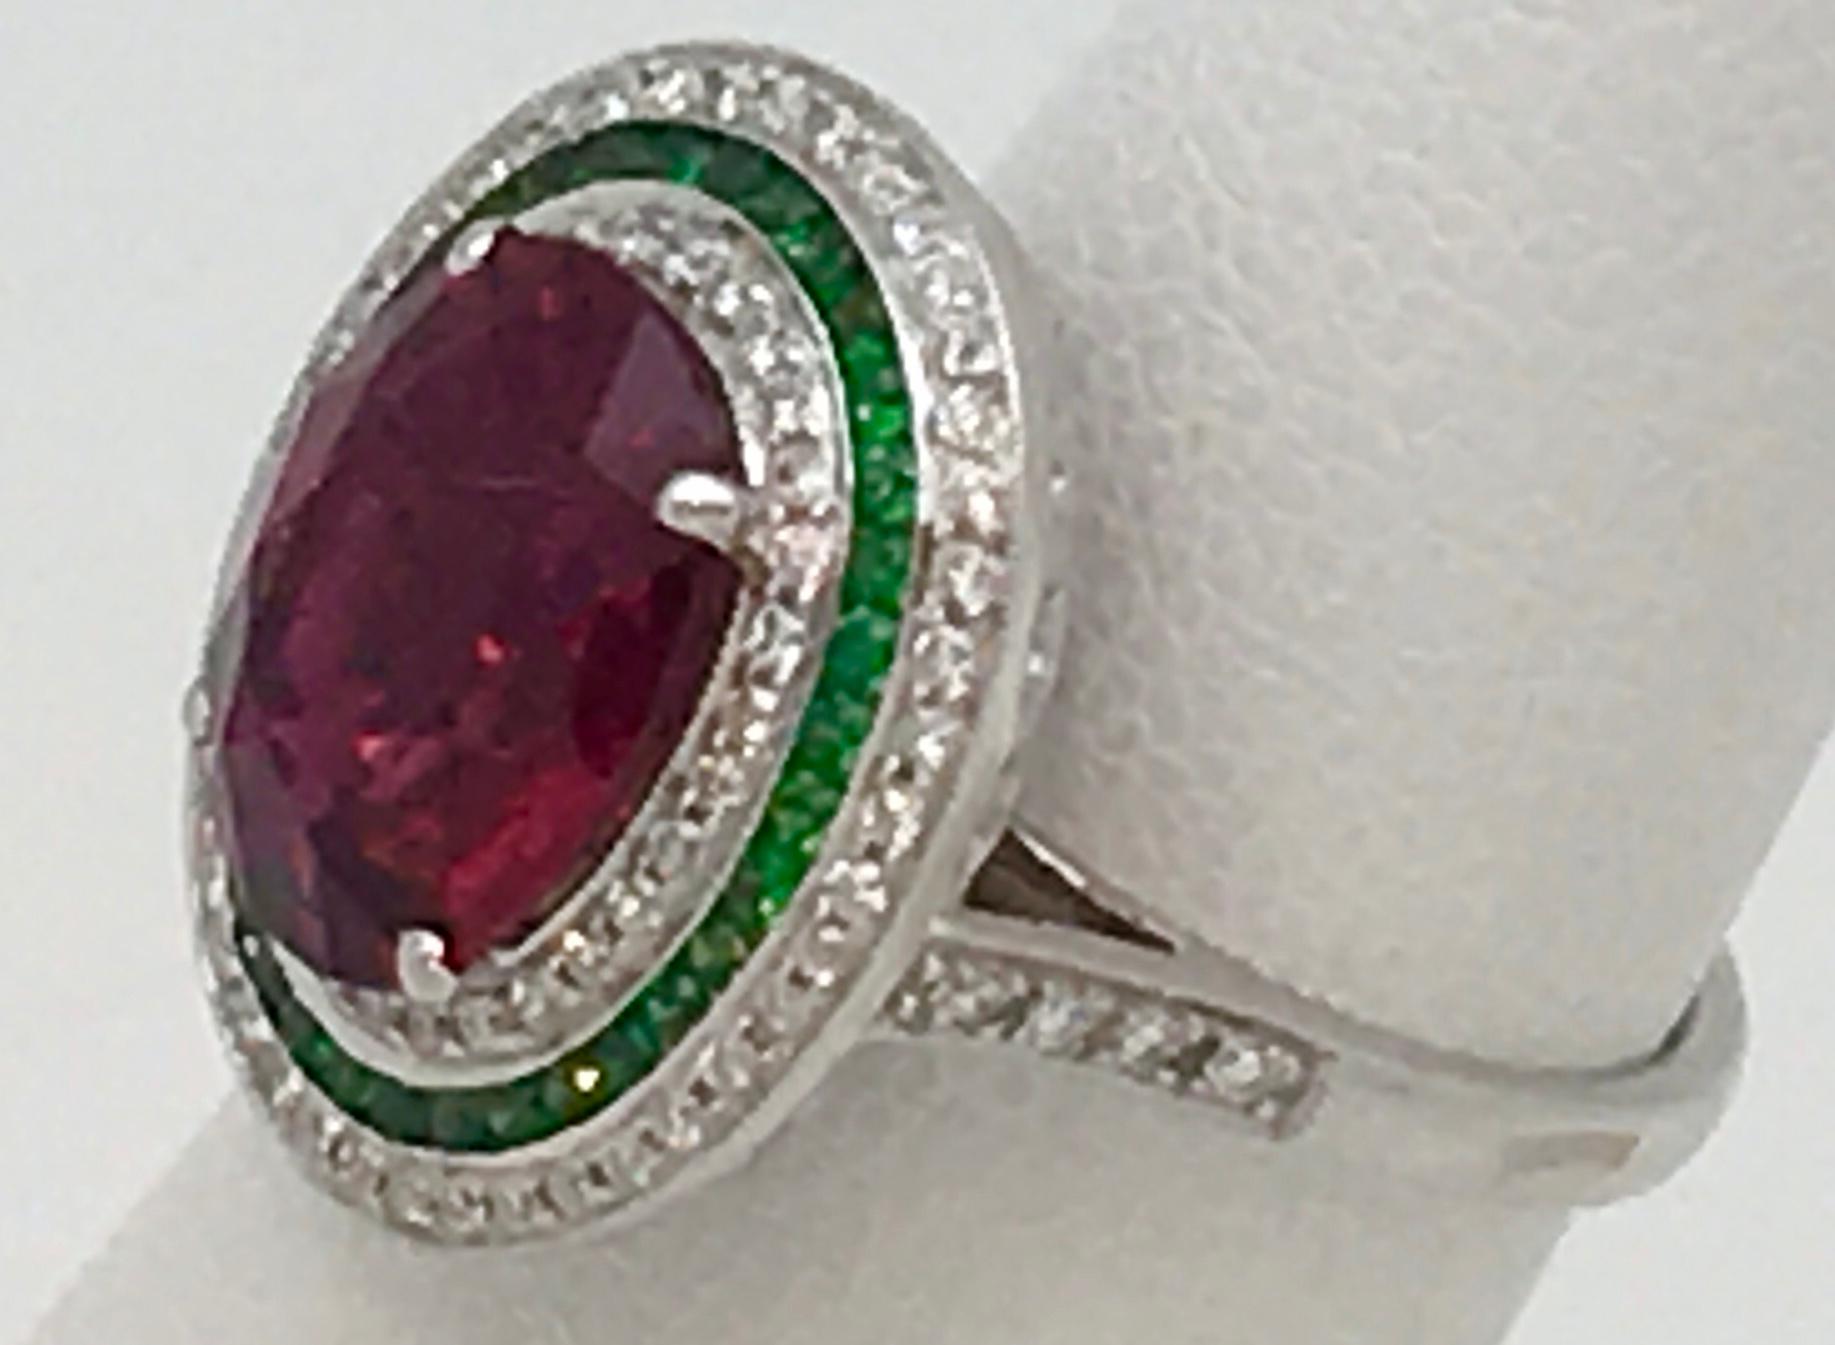 The 4.37 Carat (Scale Weight) Rubilite Tourmaline also has 82 Diamonds for .40 Carats(Scale Weight) and 35 Round Faceted Emeralds for .36 Carats(scale Weight)The gemstones are set in 18KT White Gold.